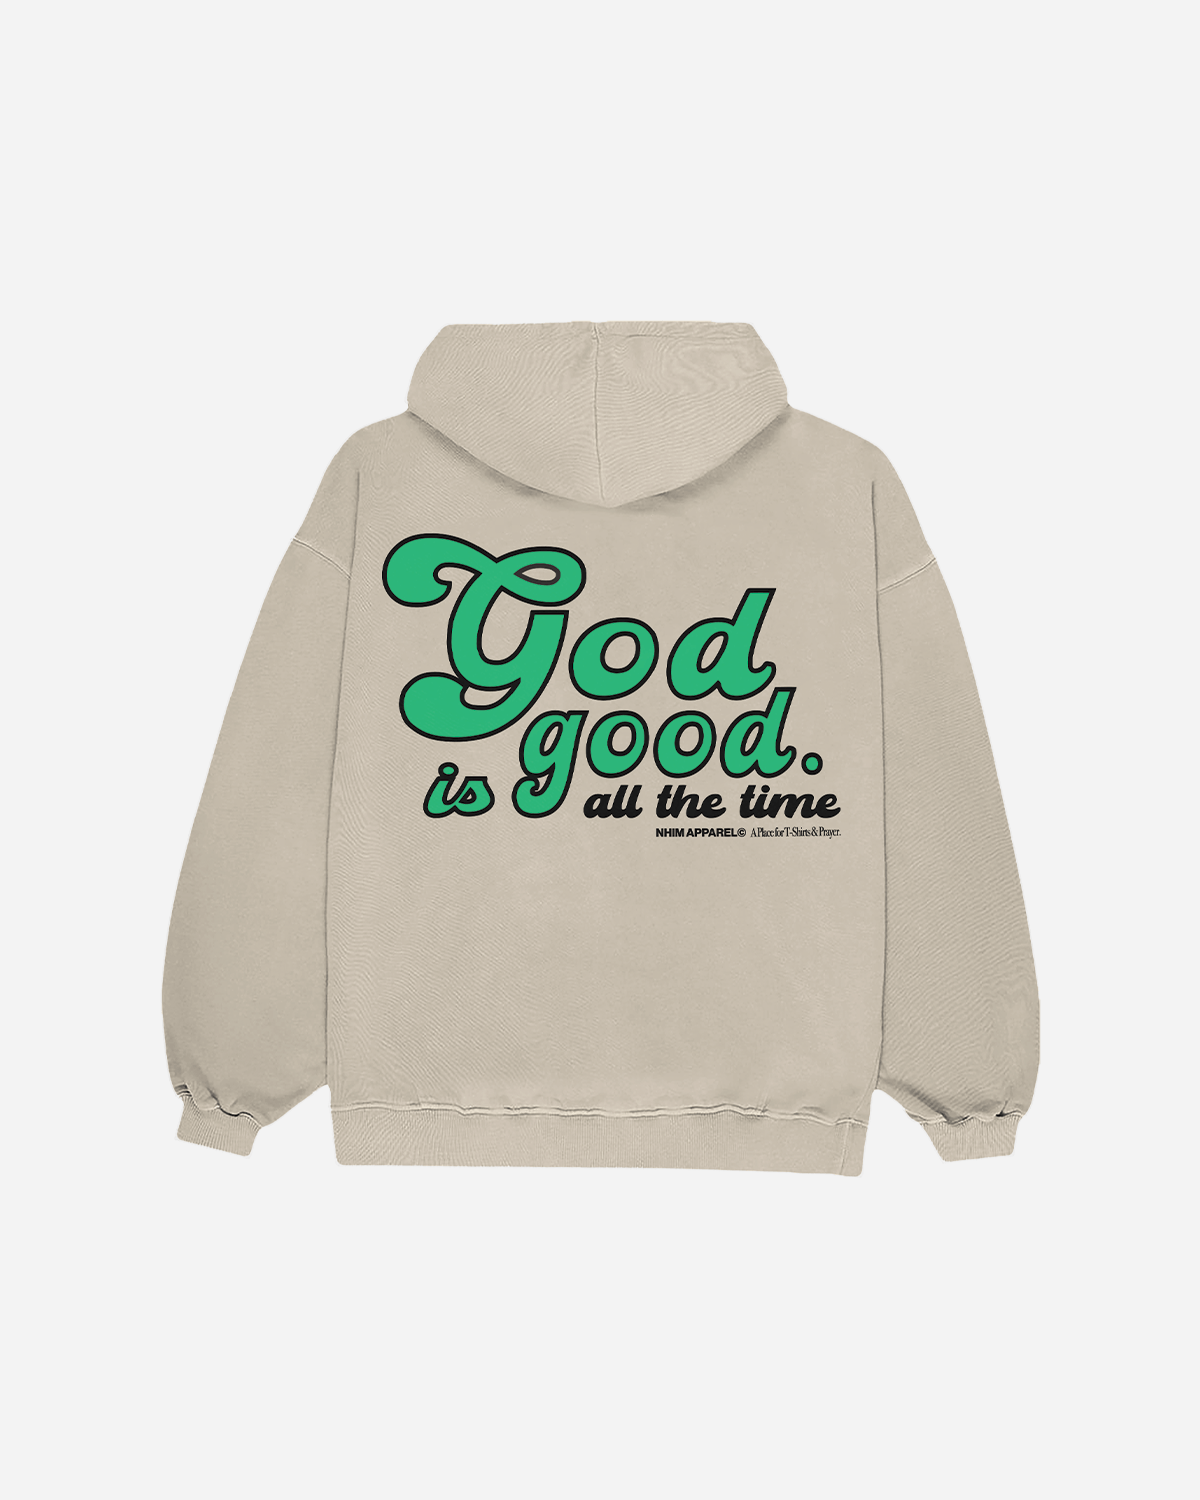 GOD IS GOOD all the time sand colored hooded sweatshirt by NHIM APPAREL Christian clothing company